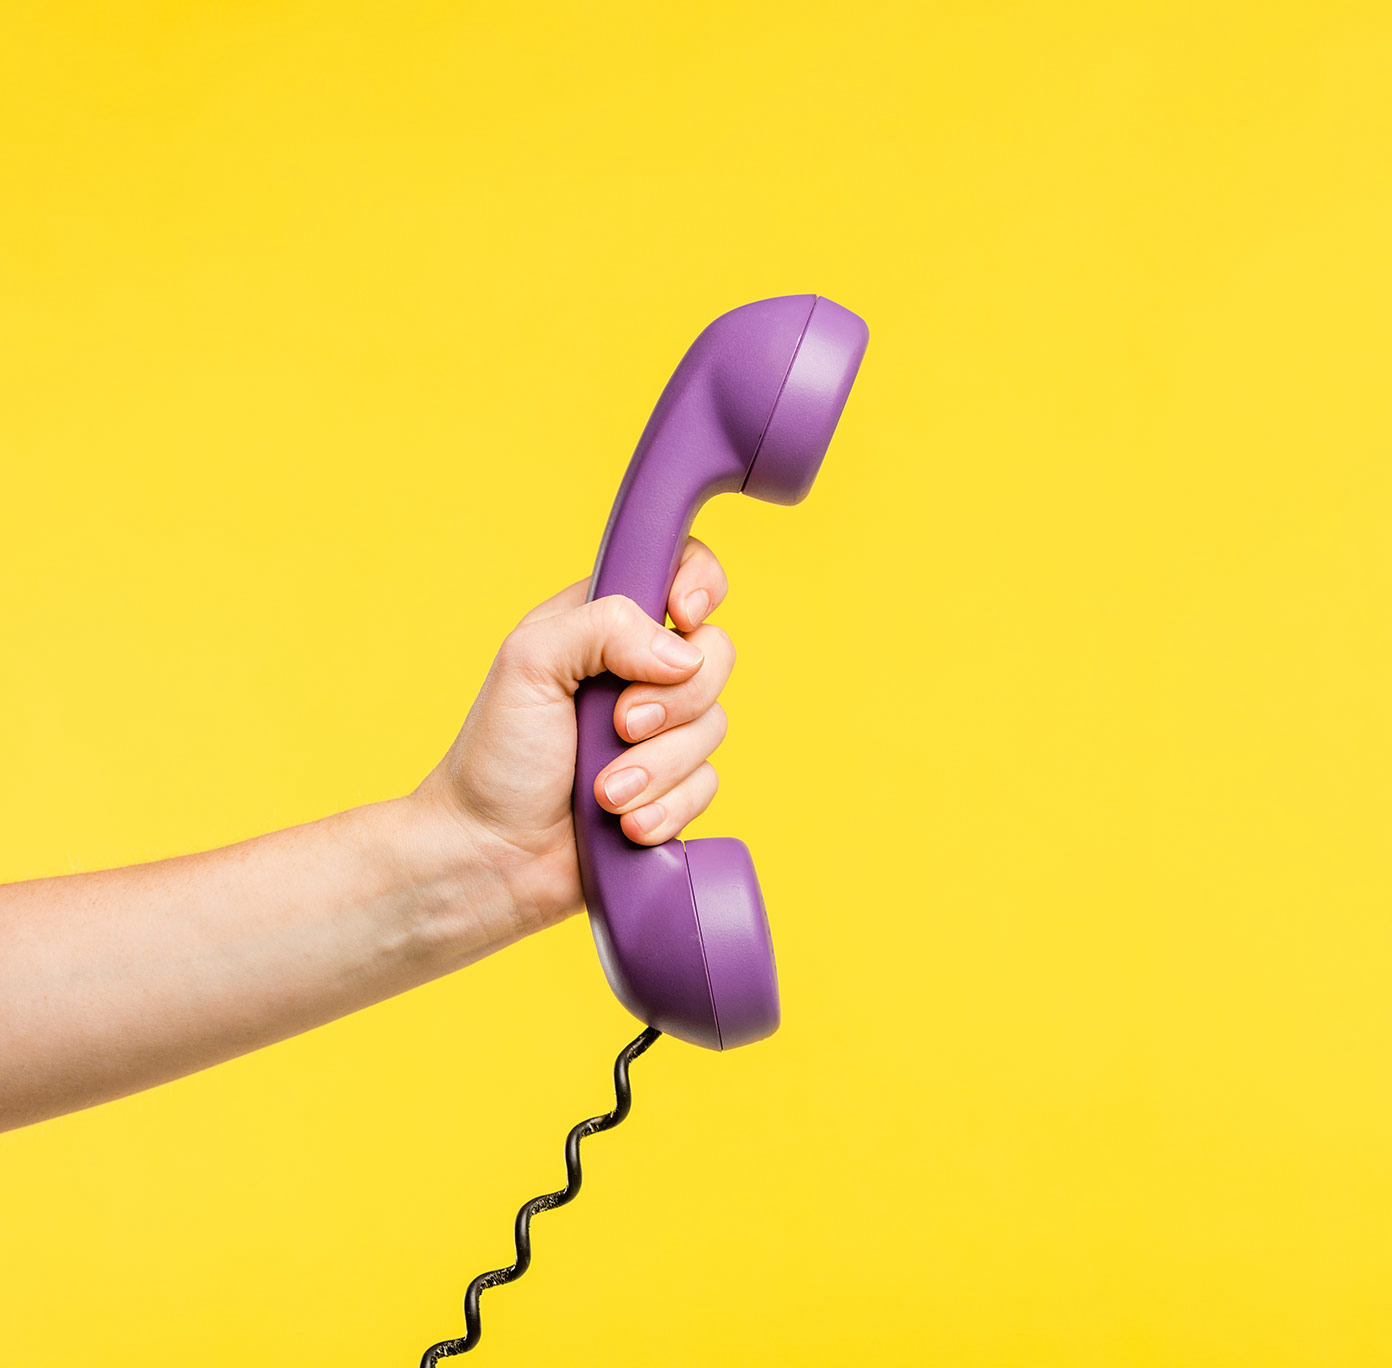 A hand holding a purple retro phone against a bright yellow backdrop.